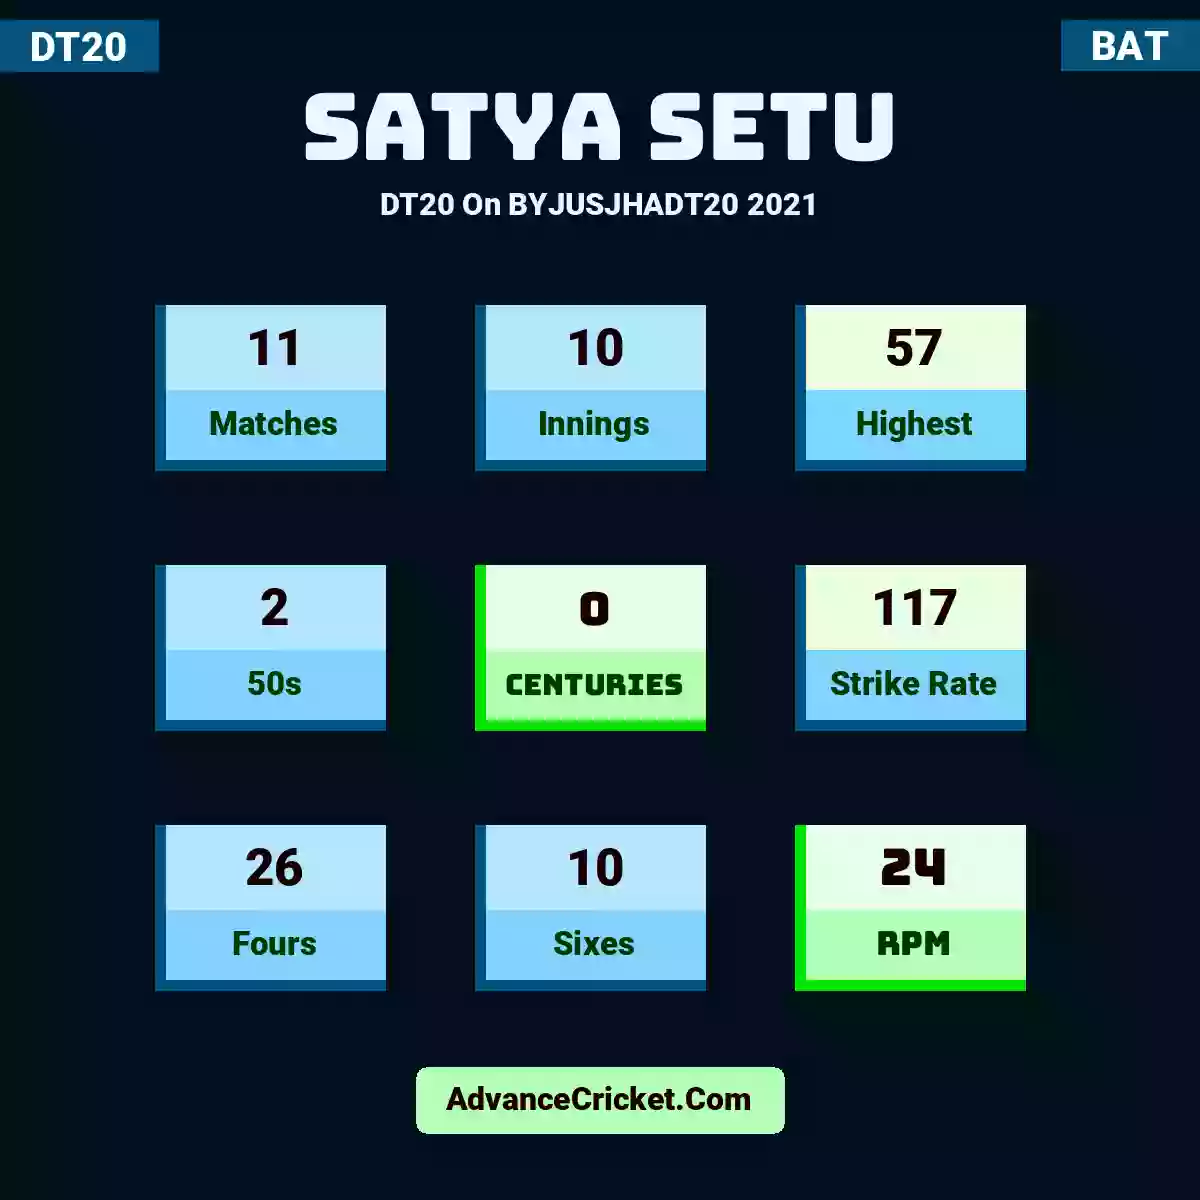 Satya Setu DT20  On BYJUSJHADT20 2021, Satya Setu played 11 matches, scored 57 runs as highest, 2 half-centuries, and 0 centuries, with a strike rate of 117. S.Setu hit 26 fours and 10 sixes, with an RPM of 24.